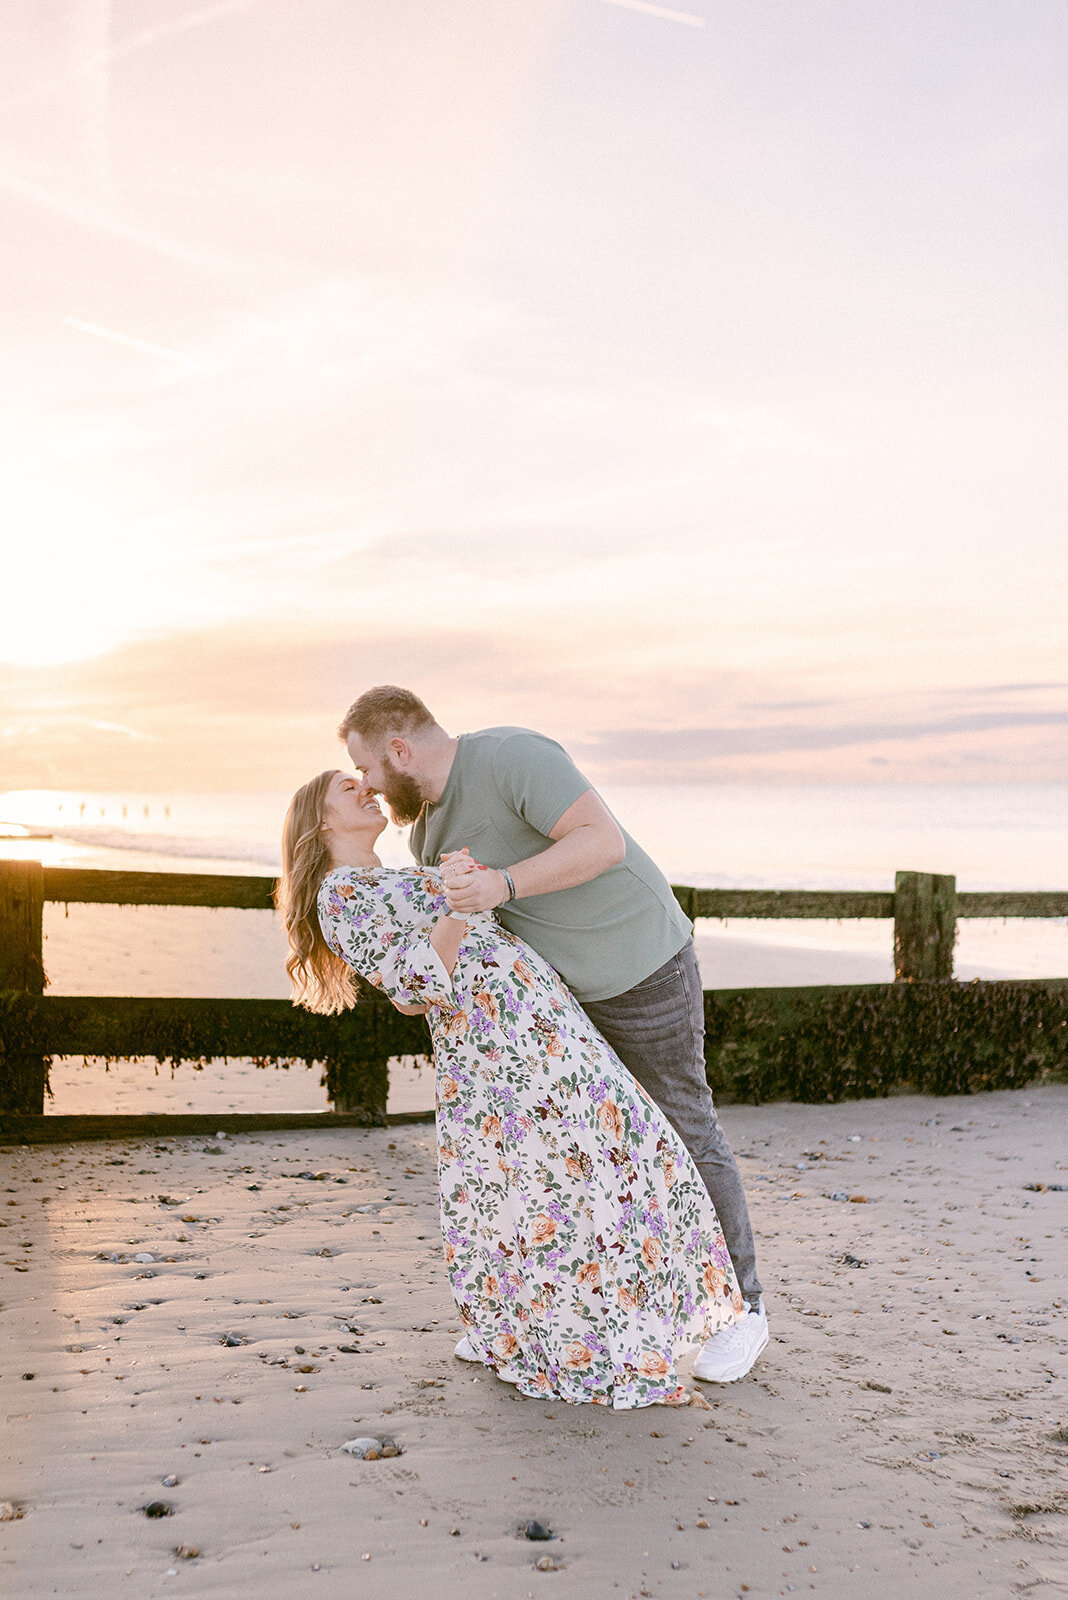 Couple who just got engaged are on the beach, with the sunrising behind them. The lady is wearing a flowery dress and the guy a green tshirt and black jeans, they are holding hands and he is bending her slightly back for a kiss